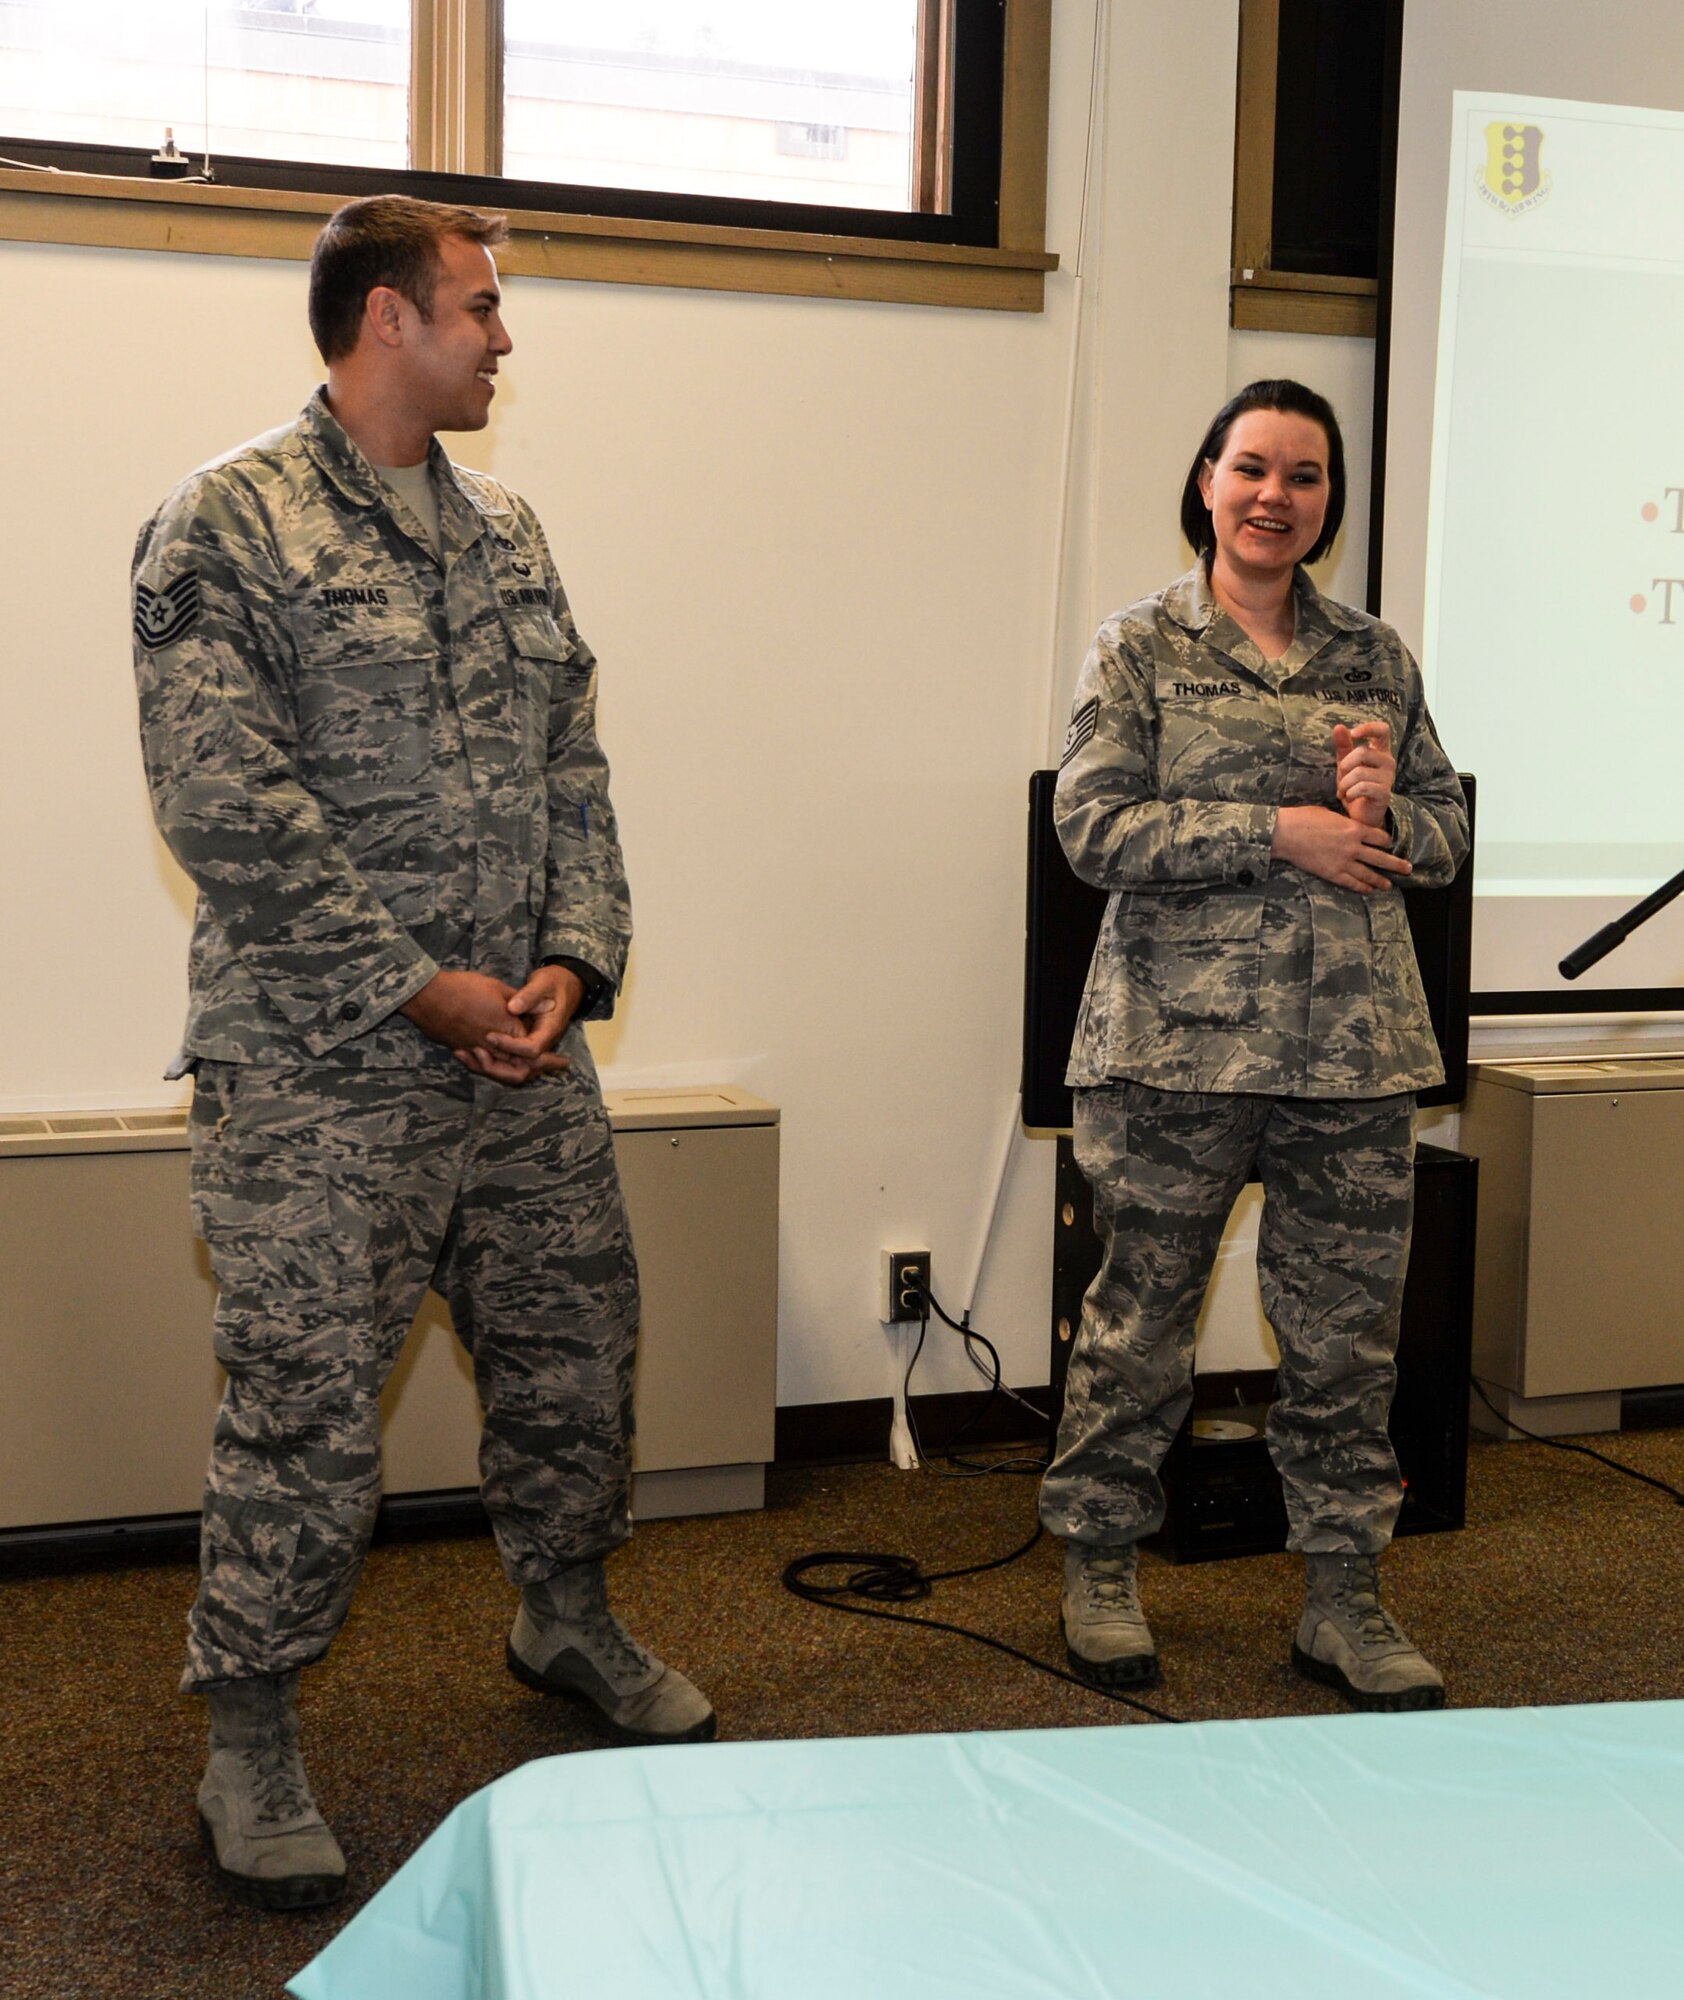 Tech. Sgts. Brian and Leah Thomas, 28th Force Support Squadron Airman and Family Readiness Center readiness NCO, and 28th Operations Support Squadron unit deployment manager, respectively, speak about their experience as foster parents during the “Why Not You?” campaign at Ellsworth Air Force Base, S.D., March 15, 2016. Many representatives spoke about the adoption and fostering programs their agencies offers. (U.S. Air Force photo by Airman 1st Class Sadie Colbert/Released)